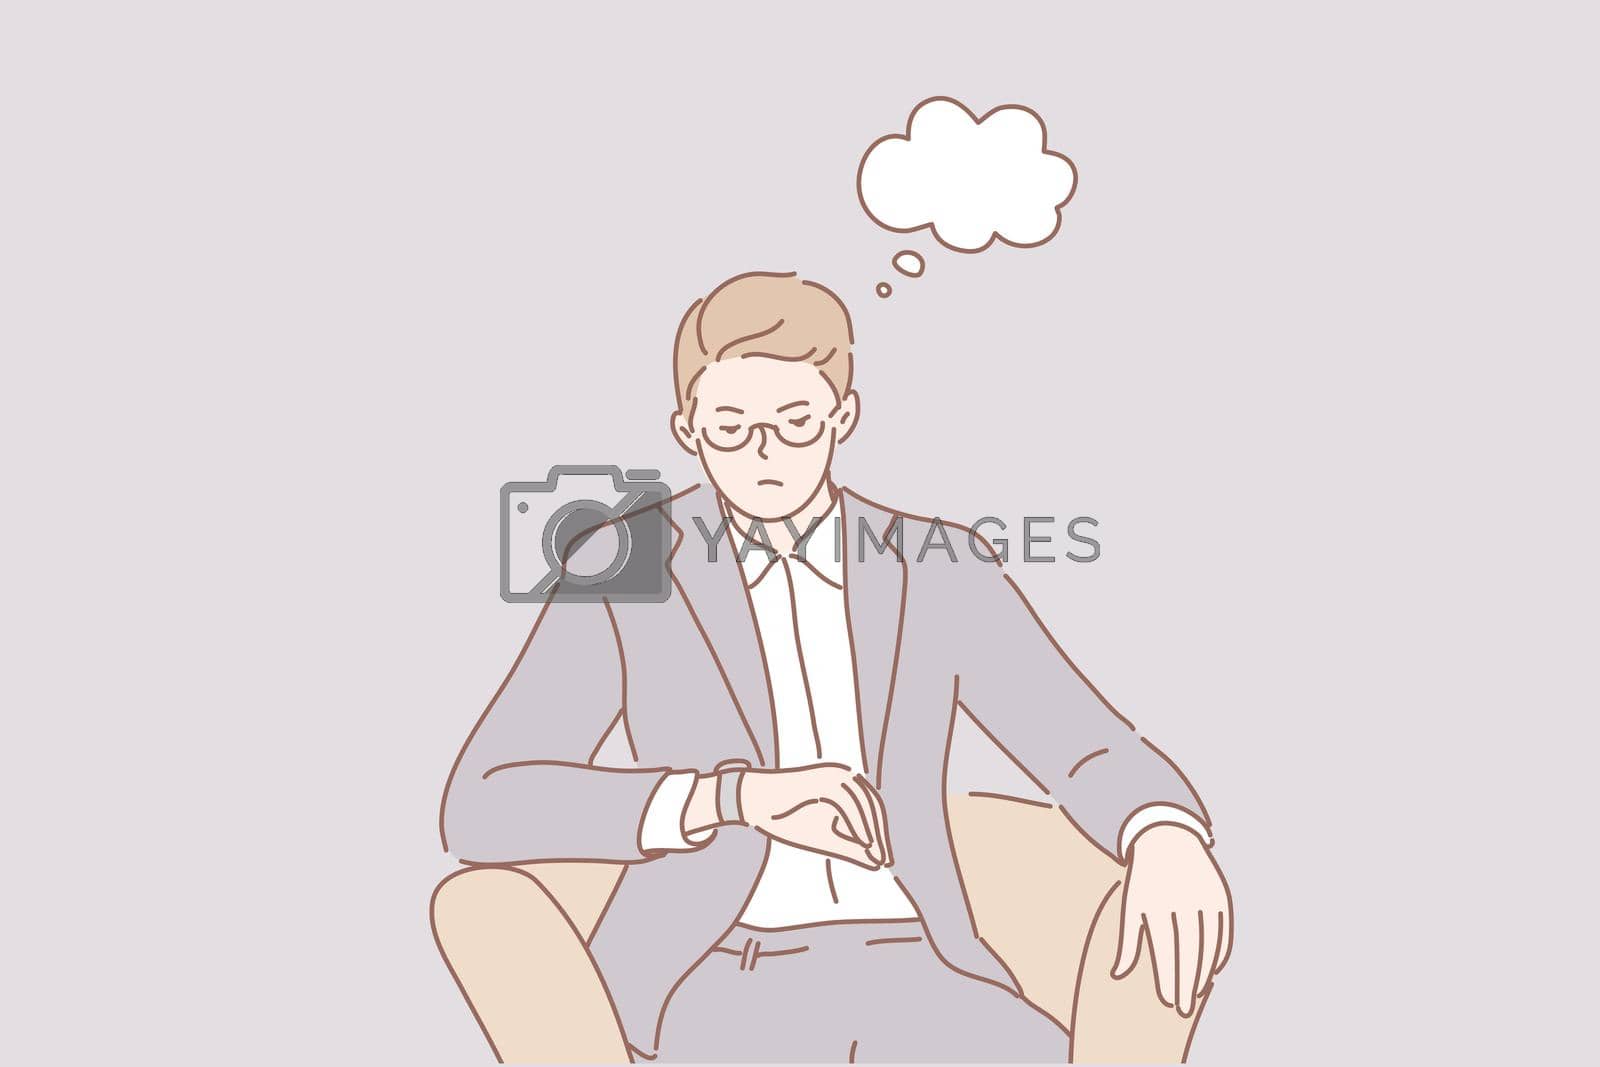 Royalty free image of Waiting for meeting, delay, punctuality business concept by VECTORIUM